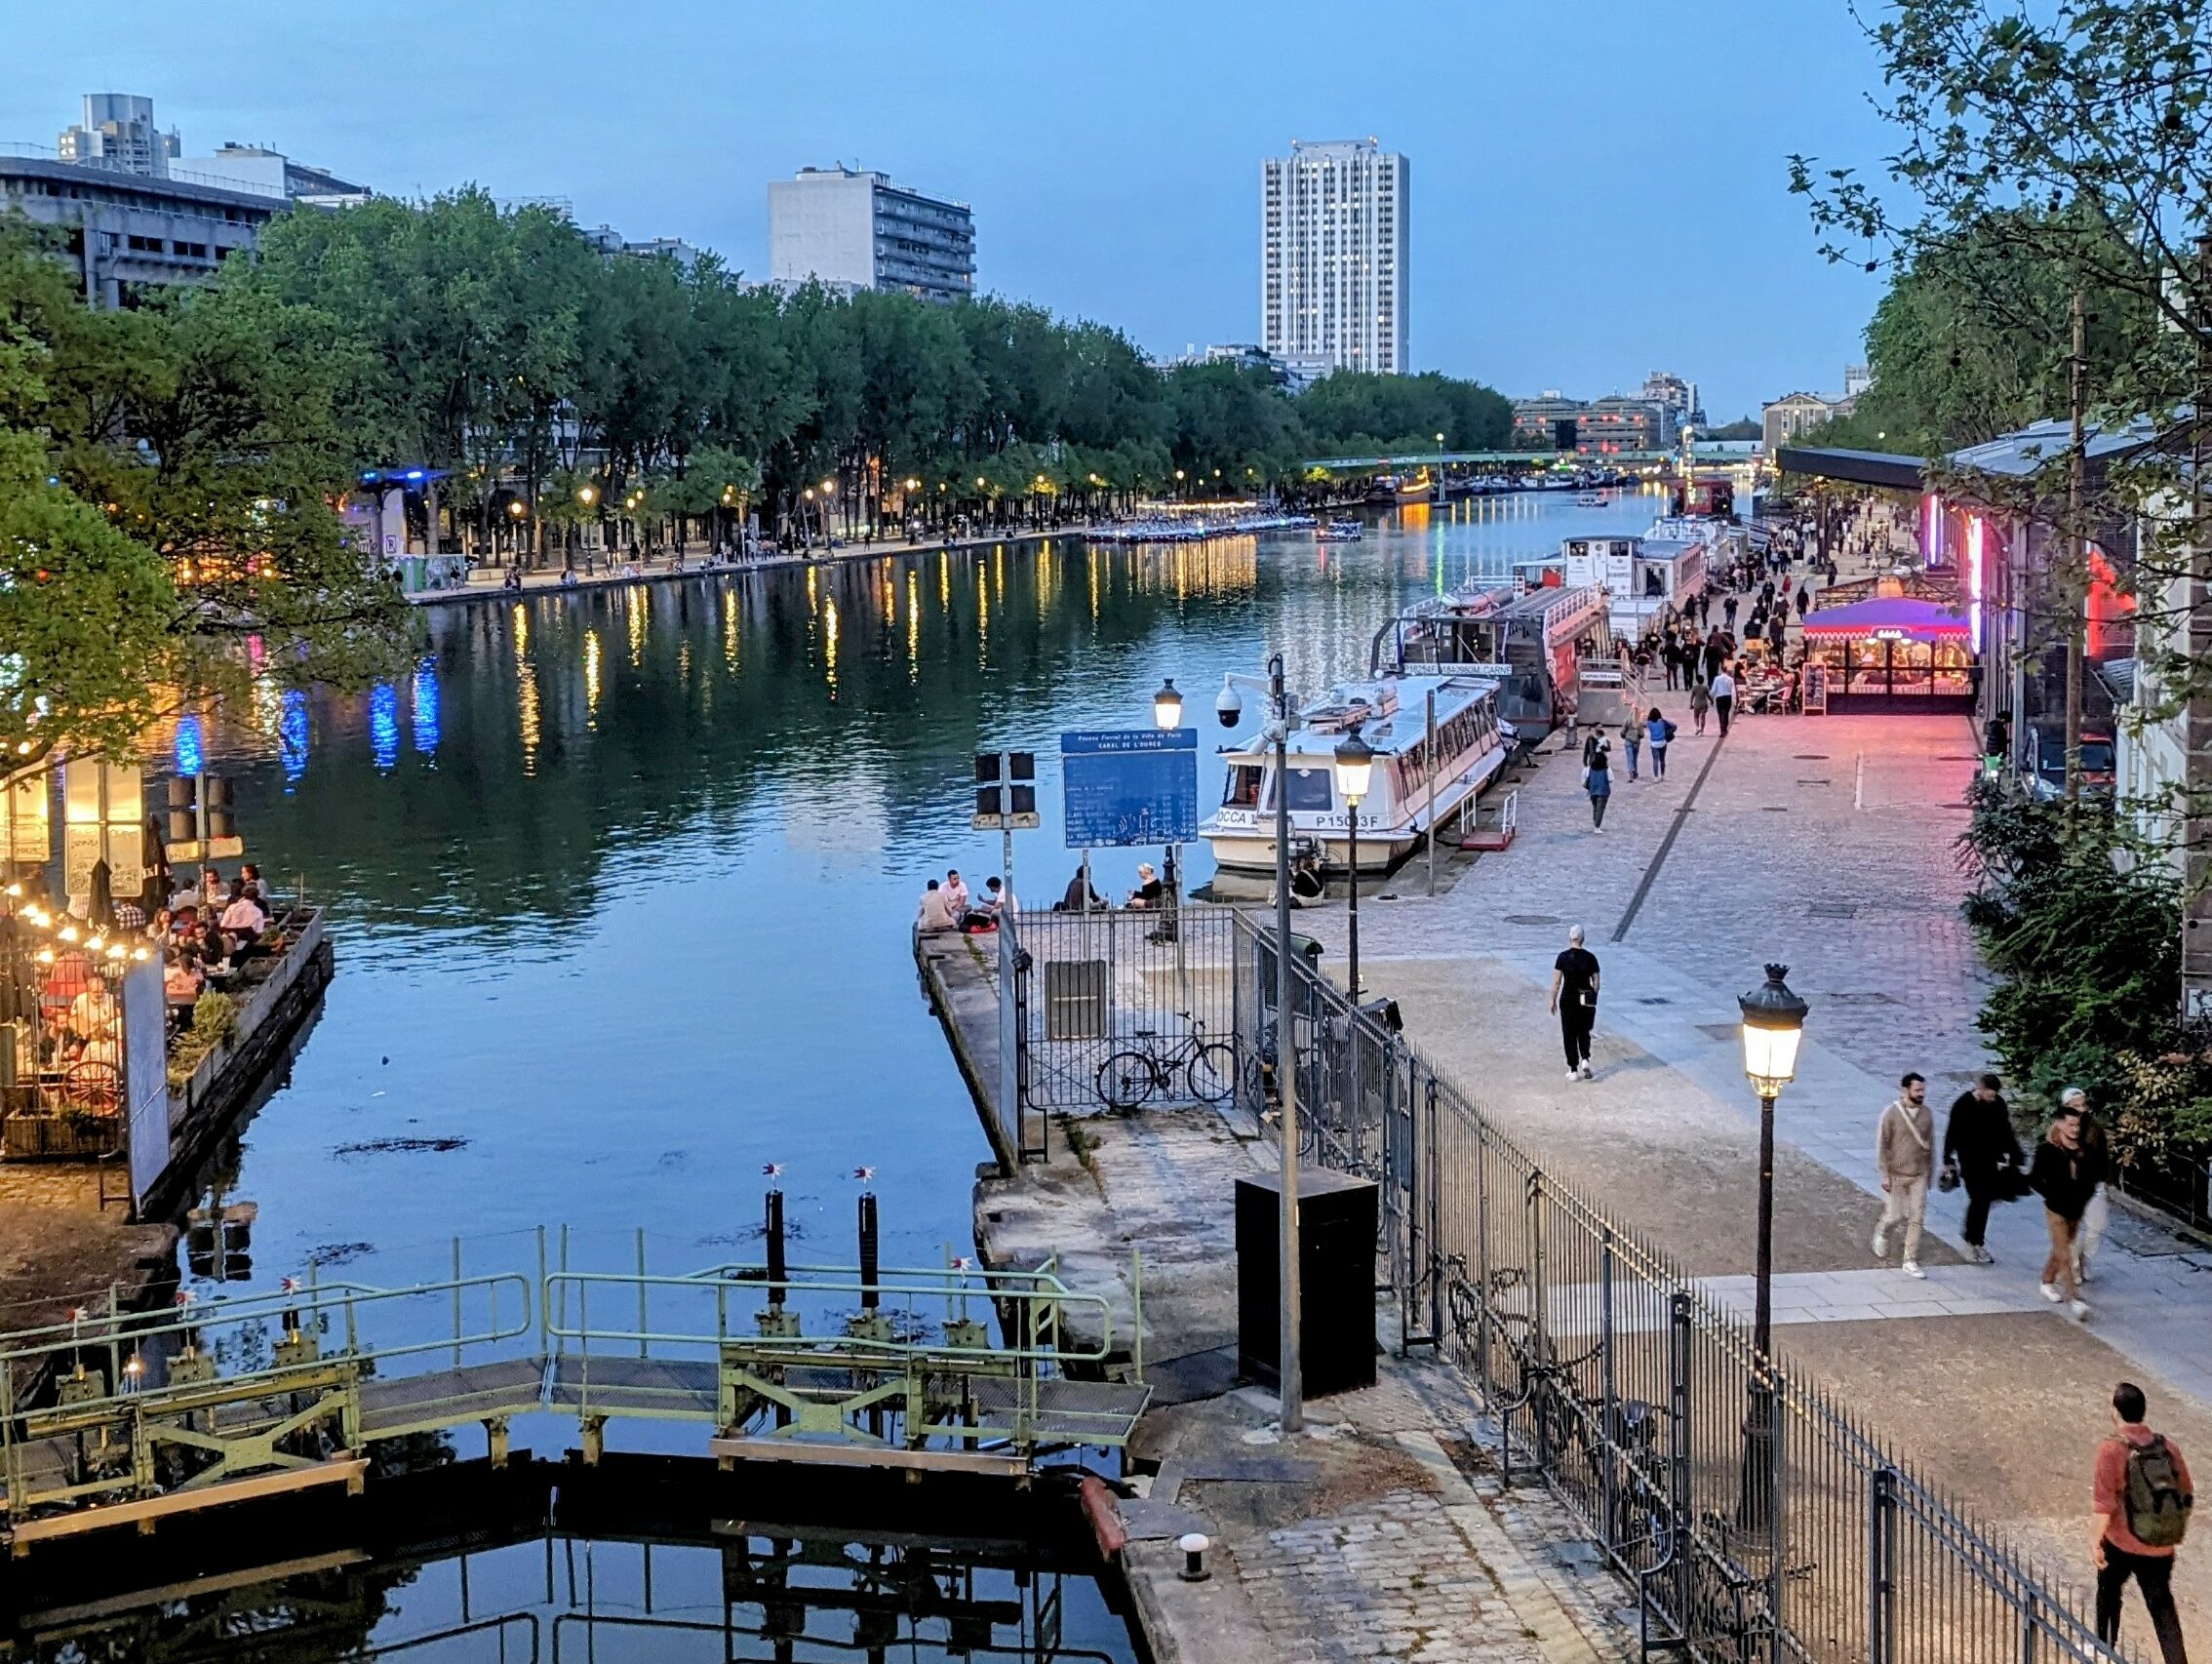 The crowded and lively Canal de l'Ourcq at dusk.